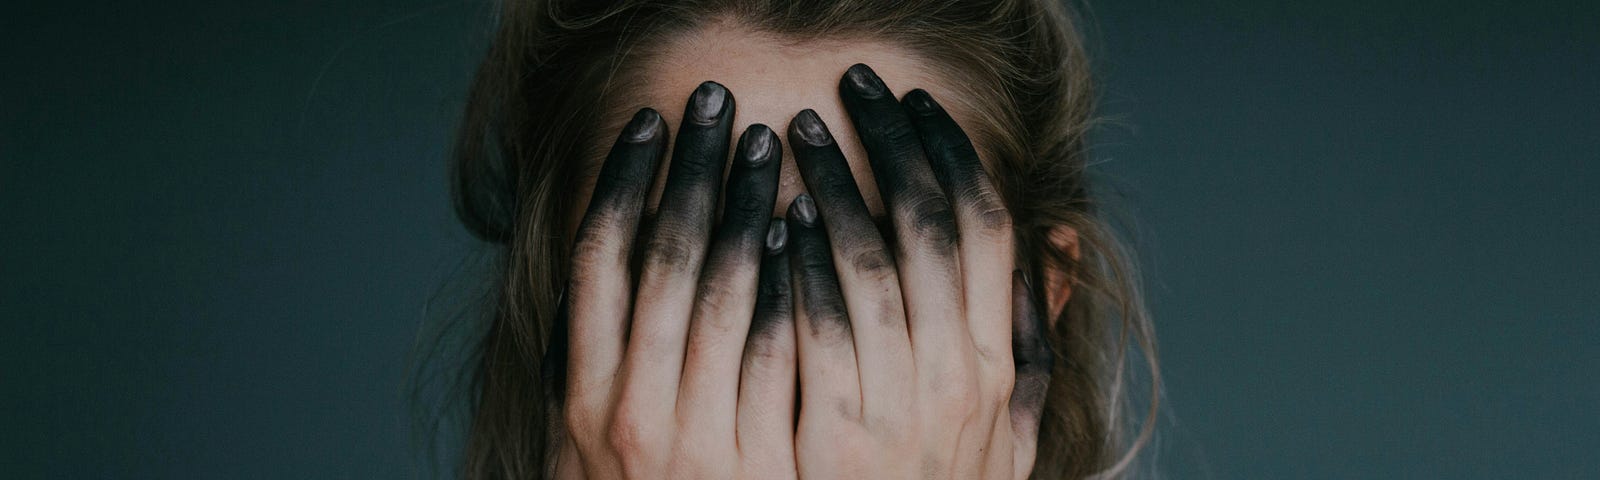 A girl with black hands holding her head — burnout